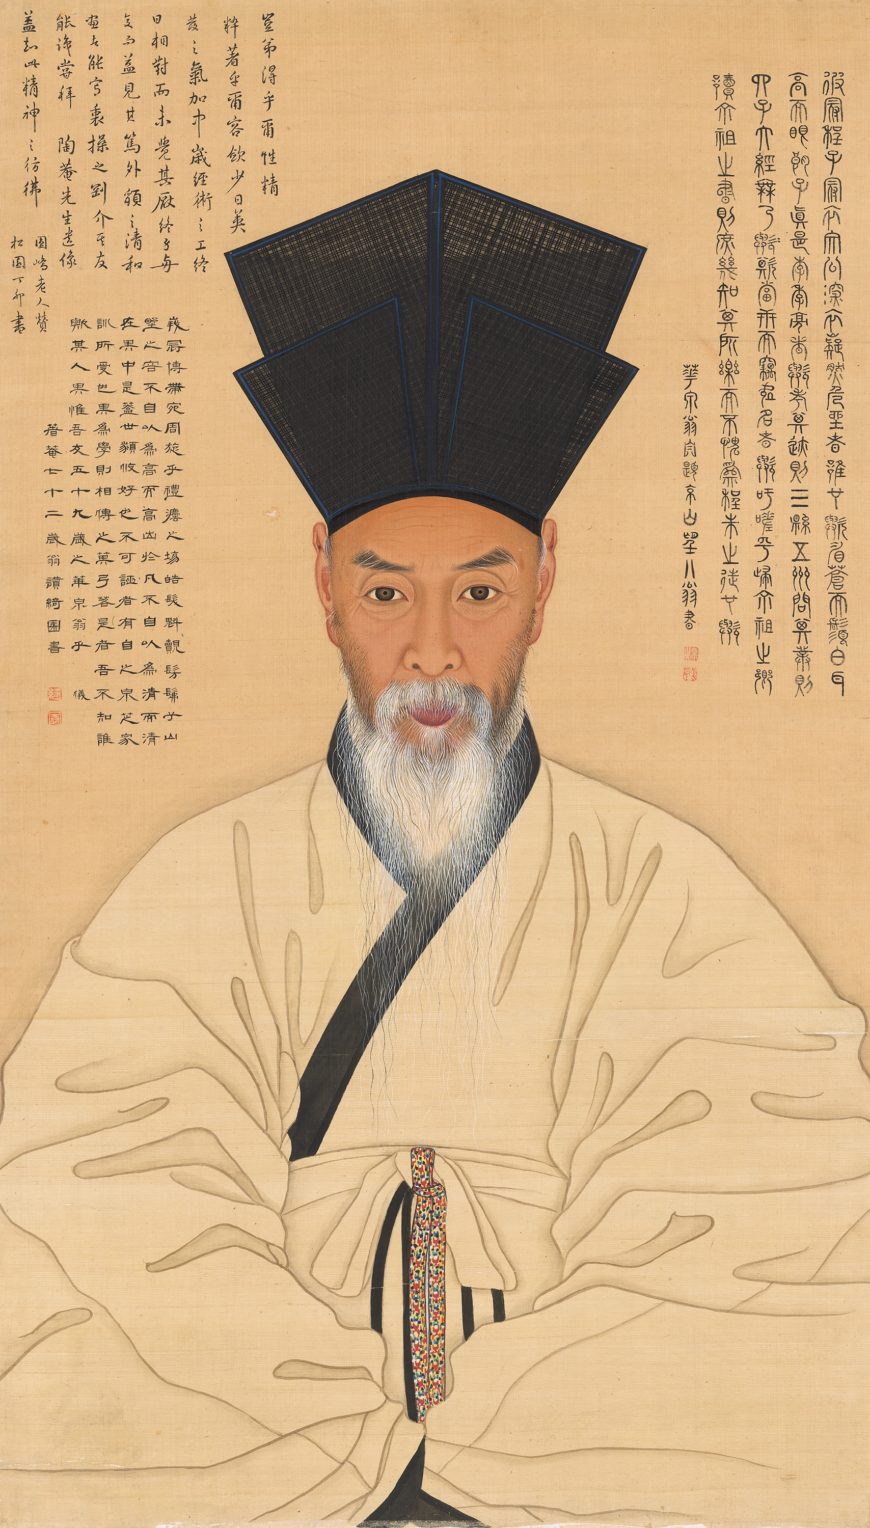 Portrait of Yi Chae, 1802 (Joseon Dynasty), ink and colors on silk, 98.4 x 56.3 cm, Treasure 1483 (National Museum of Korea)